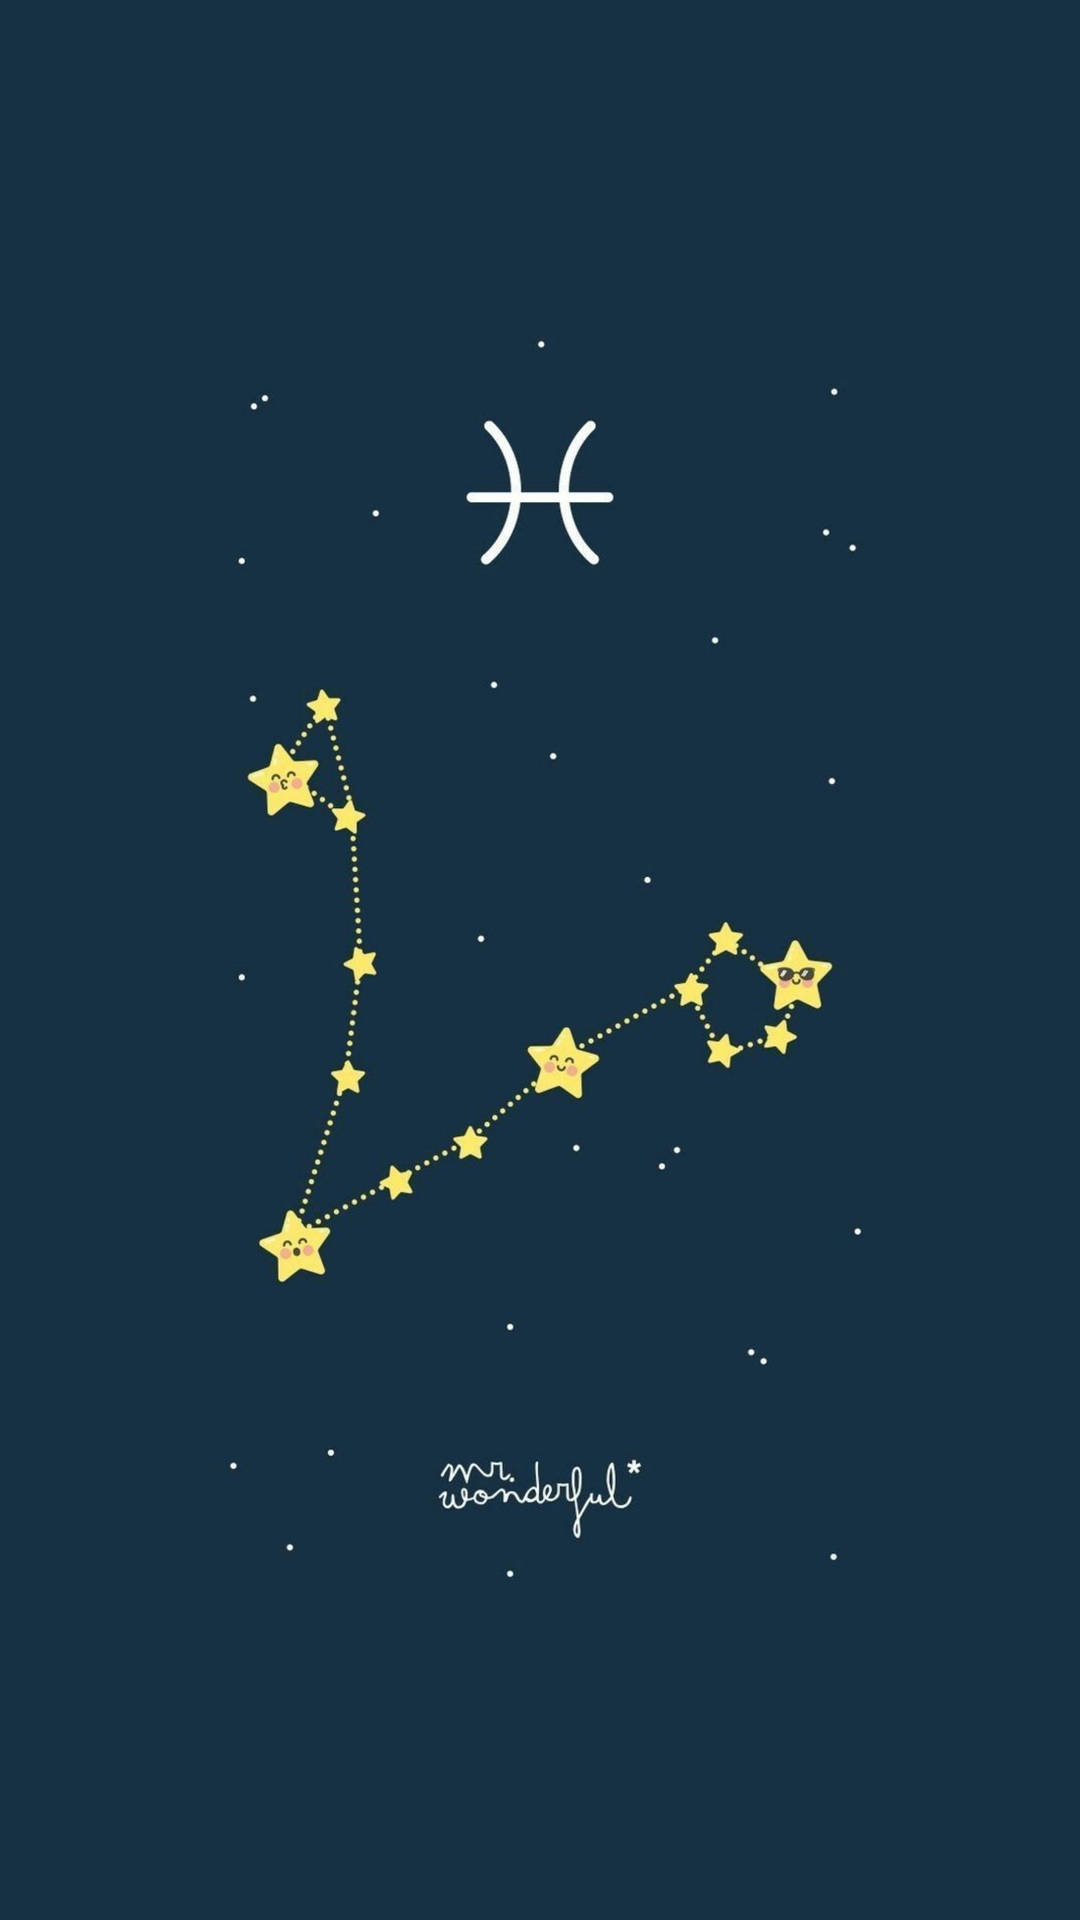 Caption: Vibrant Cartoon Illustration Of Pisces Constellation In The Starry Night Sky